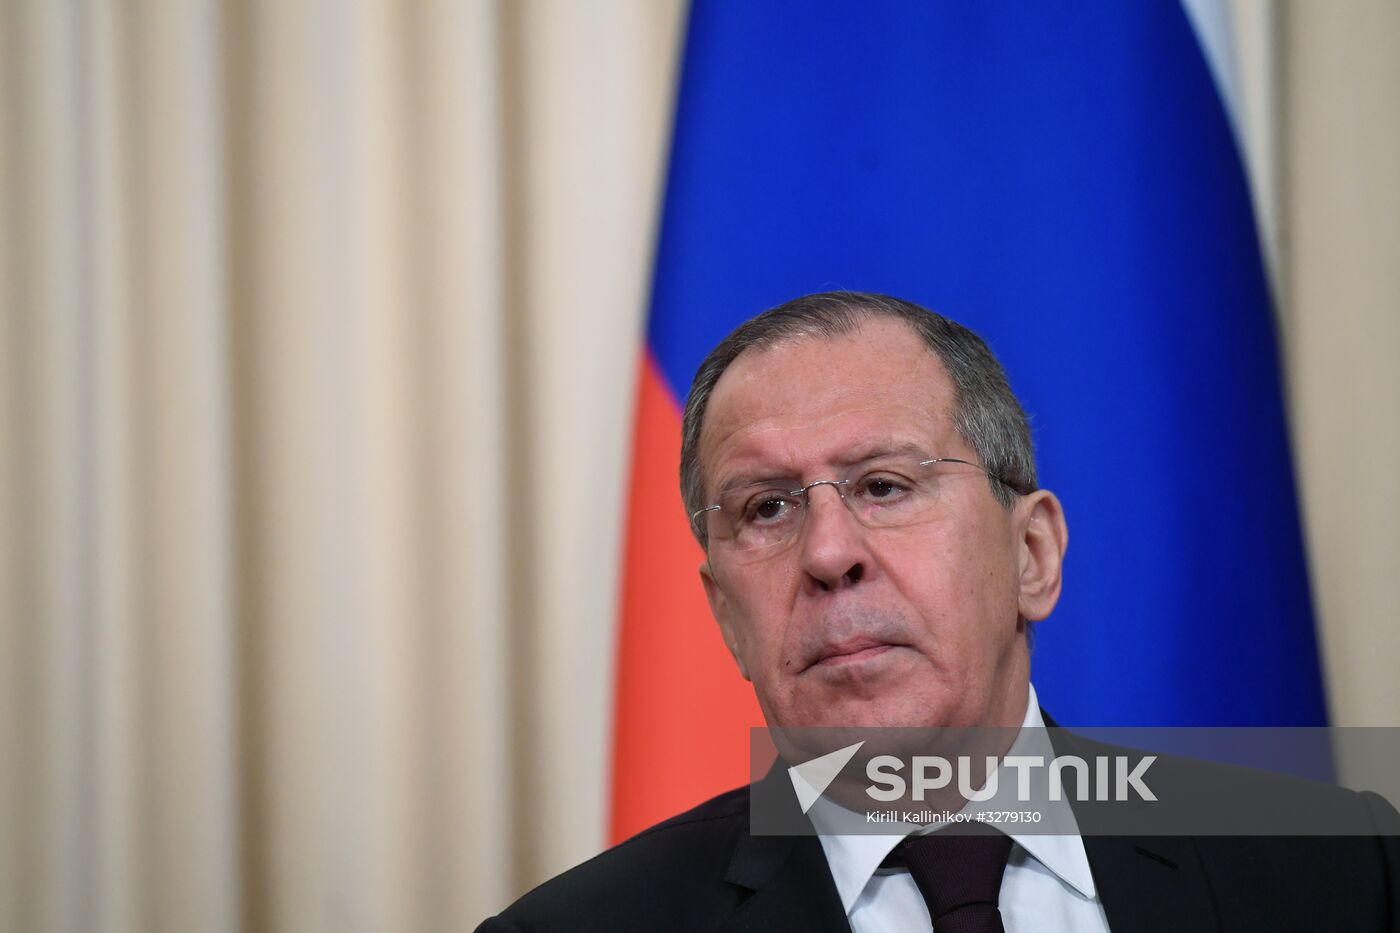 Russian Foreign Minister Lavrov meets with his Yemeni counterpart Al-Mekhlafi